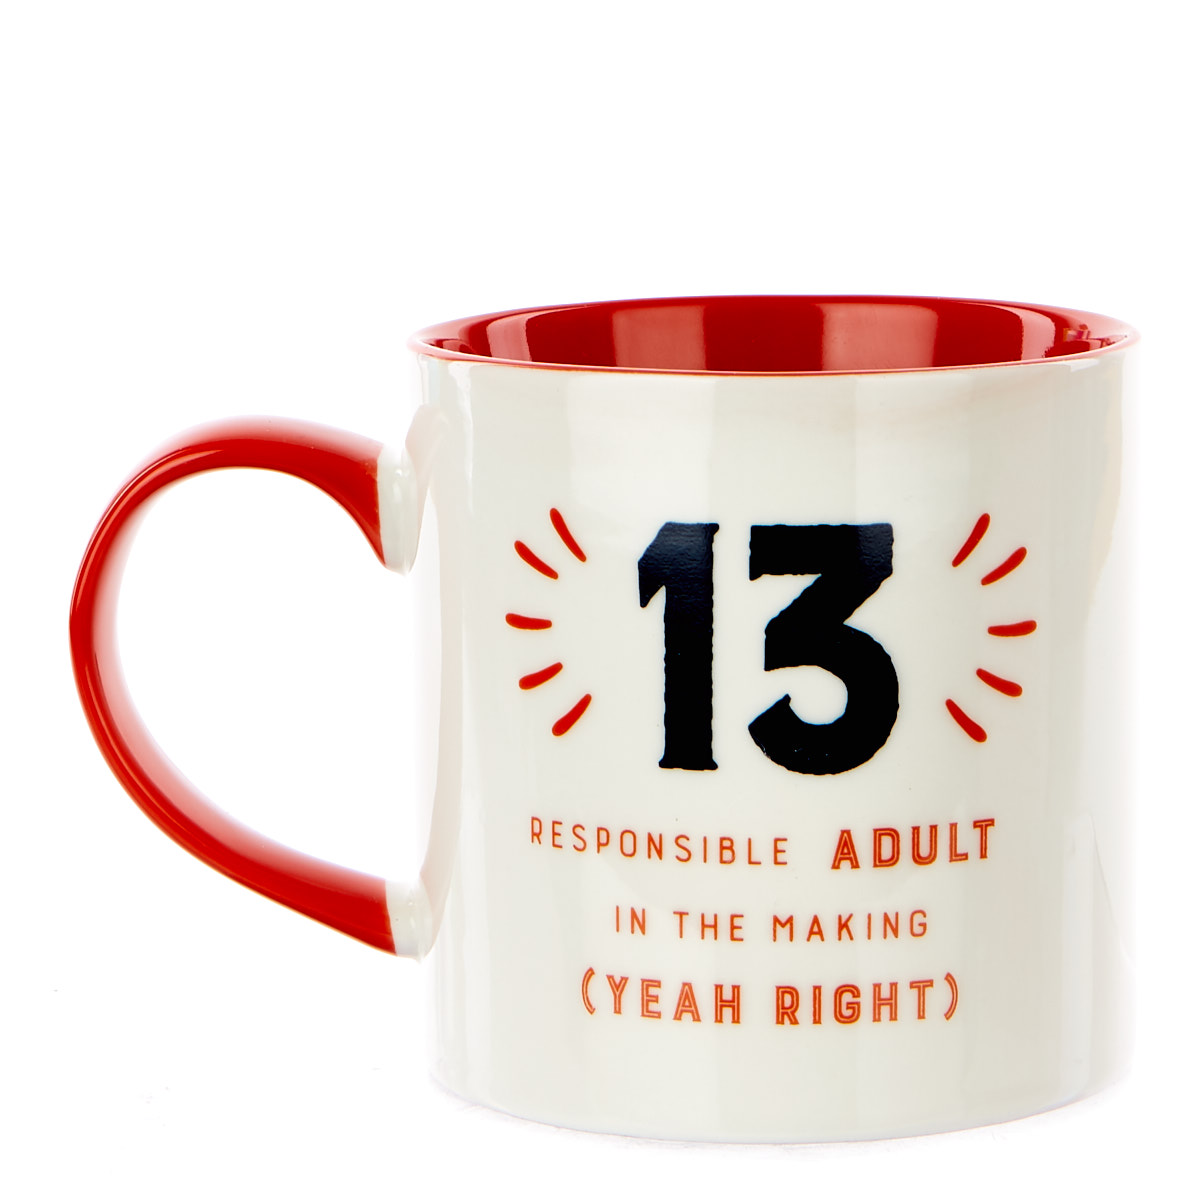 13th Birthday Mug - Responsible Adult In The Making